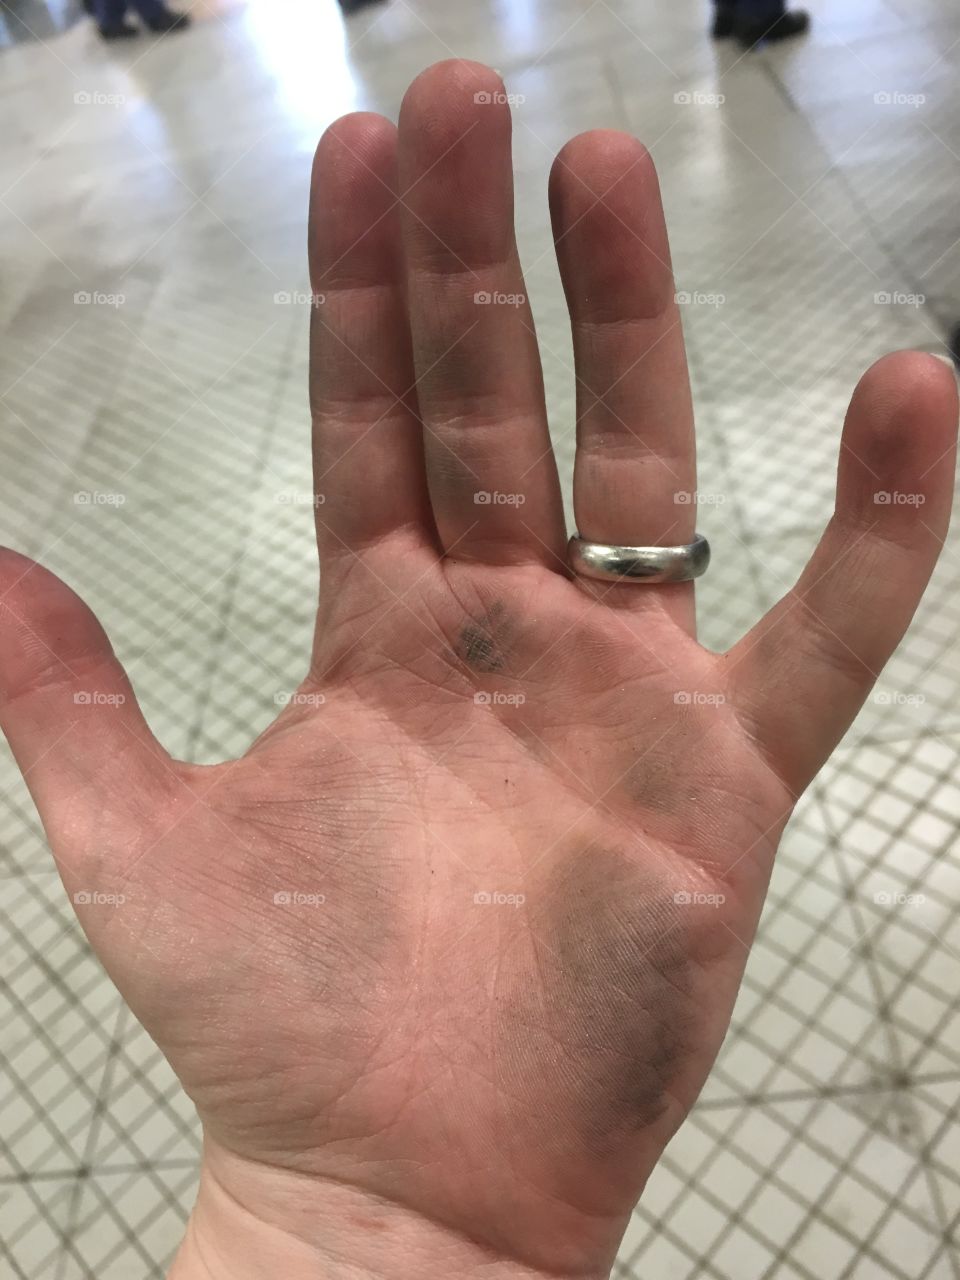 Dirty hand at work 